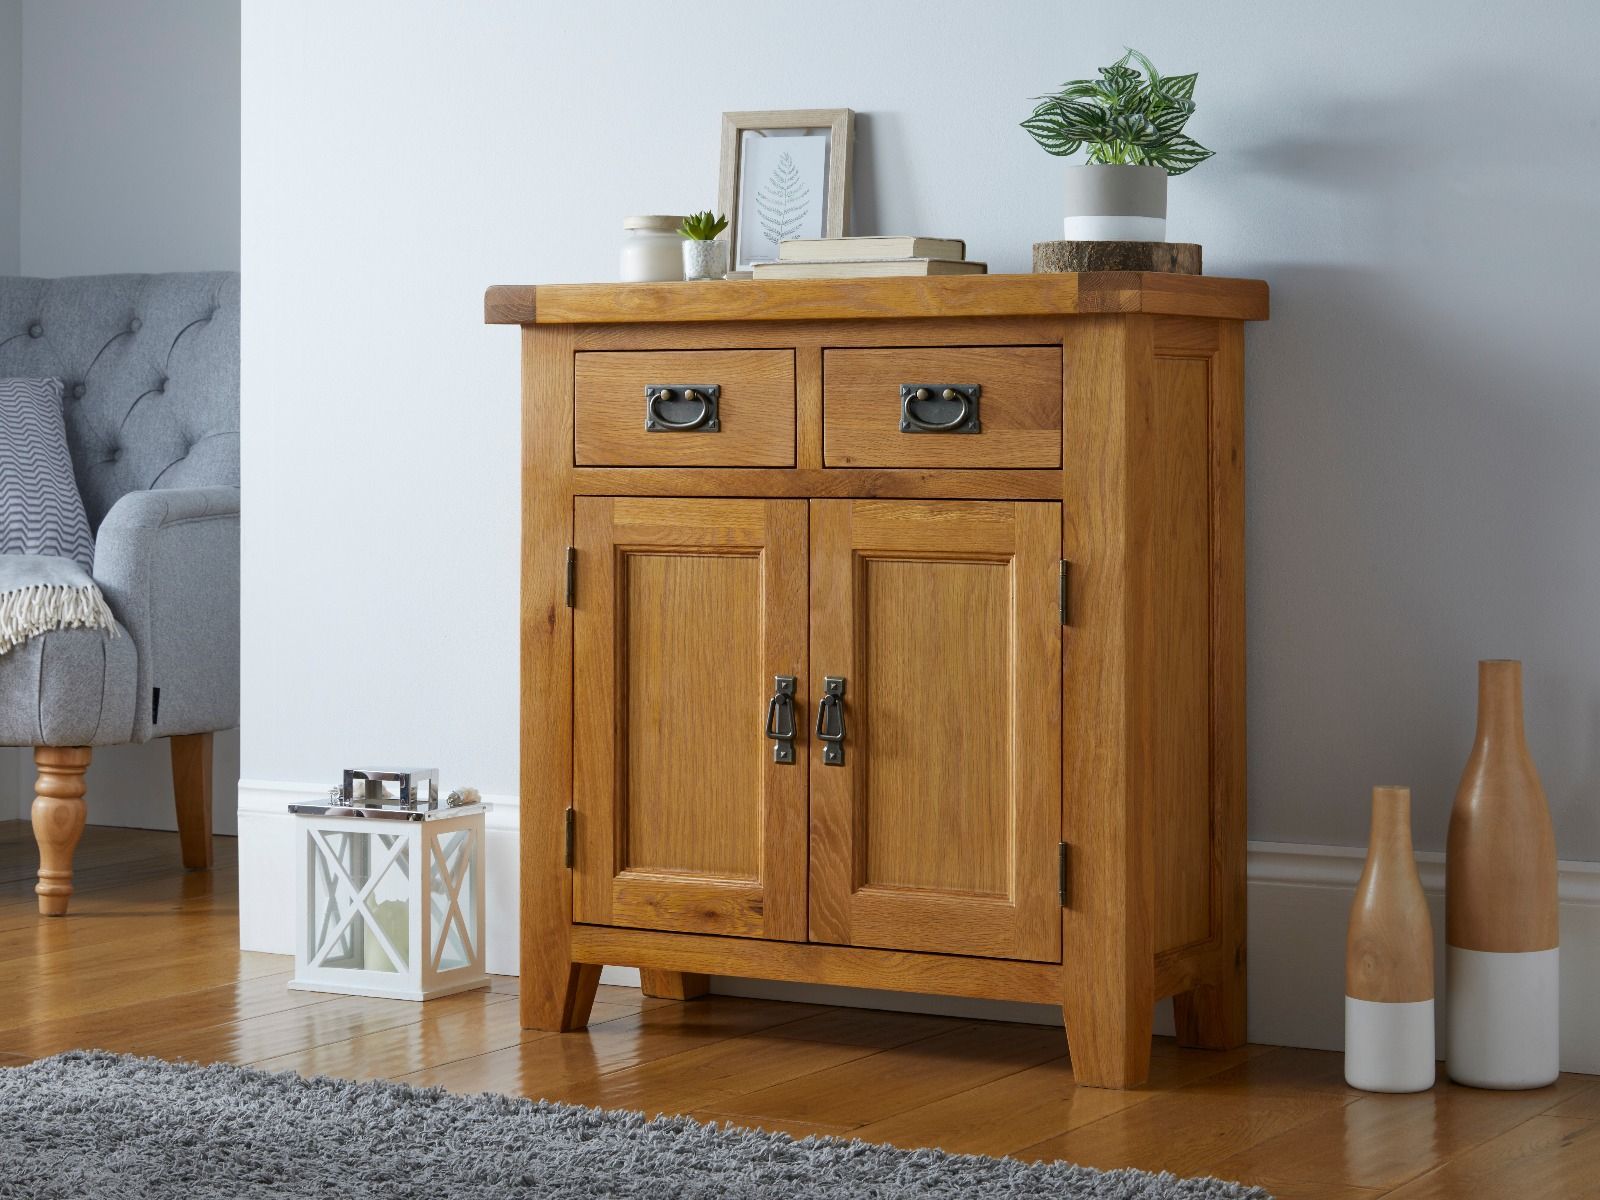 Small Oak Sideboard 80cm – Free Delivery | Top Furniture In Most Popular Rustic Oak Sideboards (View 9 of 15)